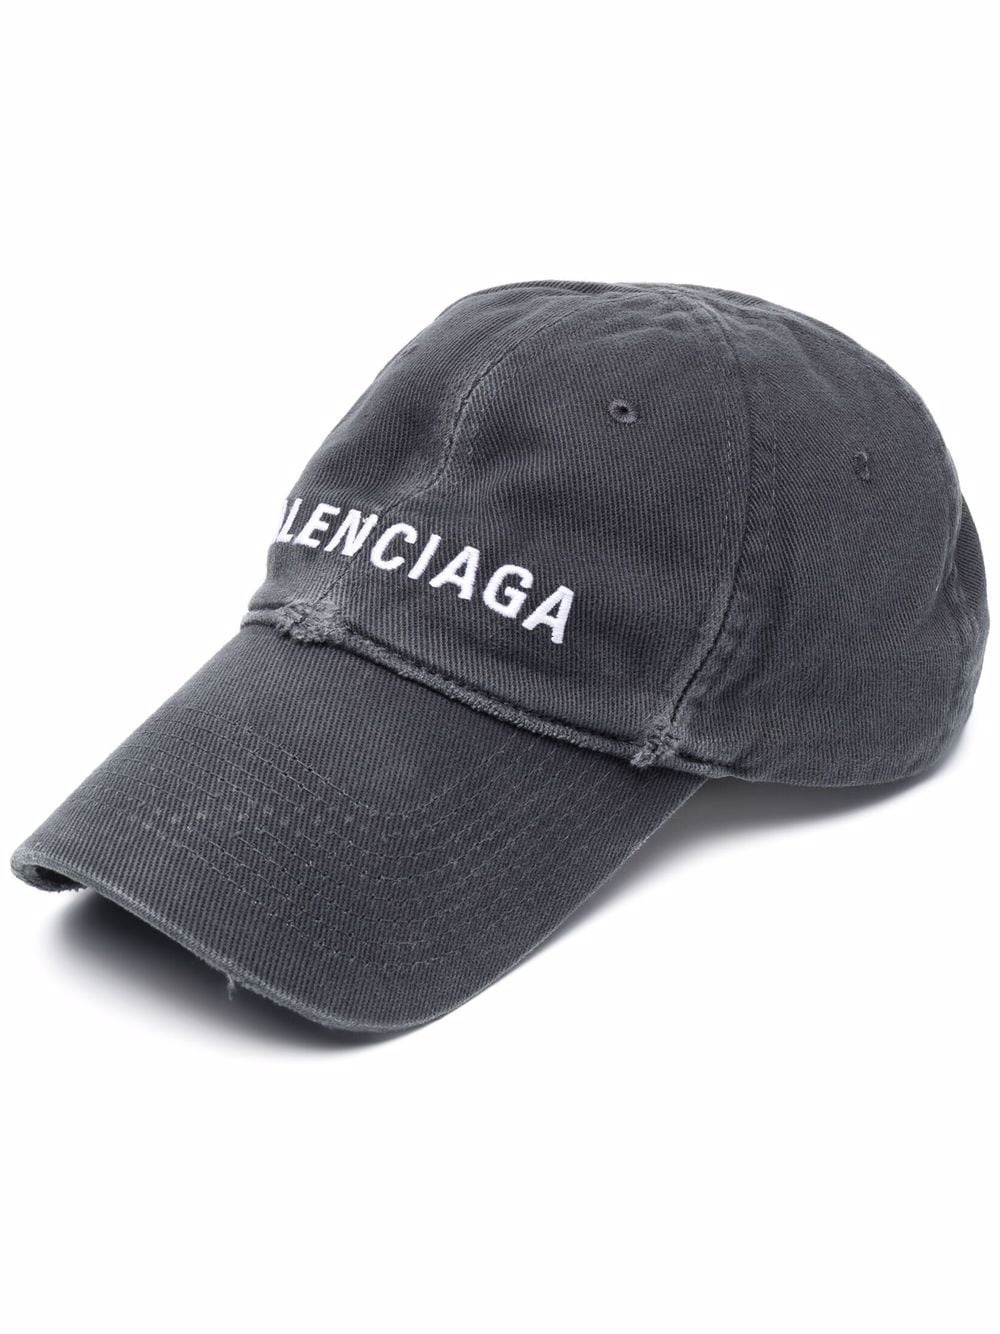 logo-embroidered distressed-effect cap - 1